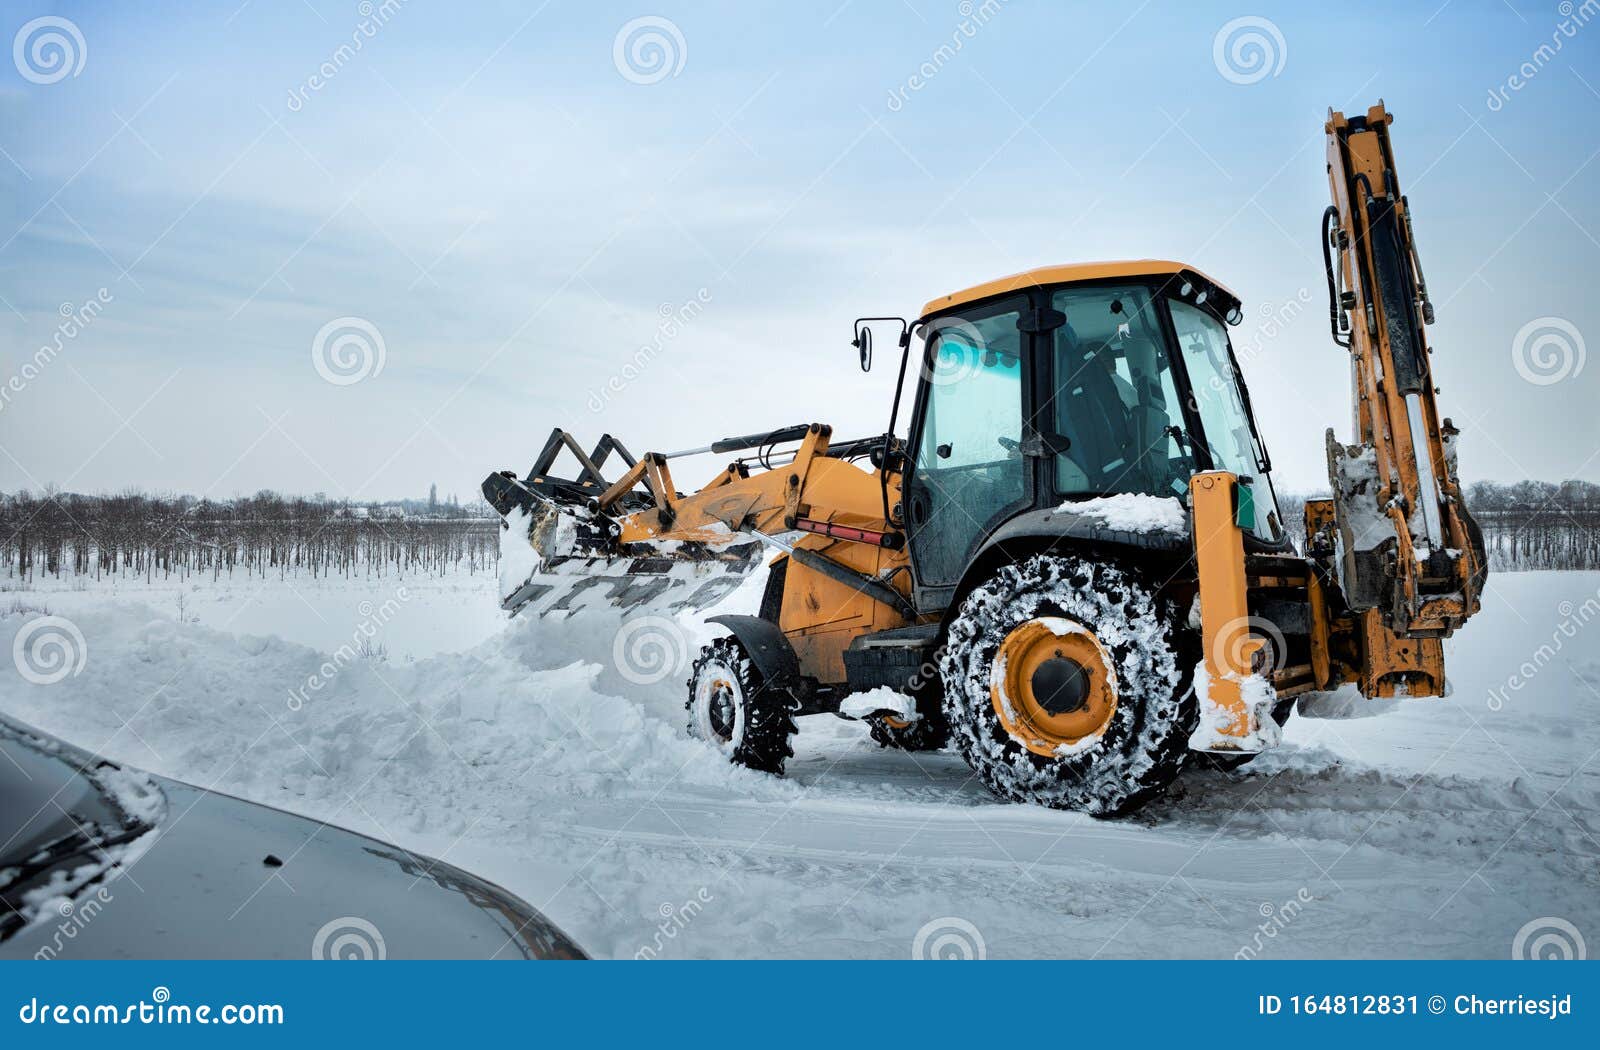 clearing snow after a storm